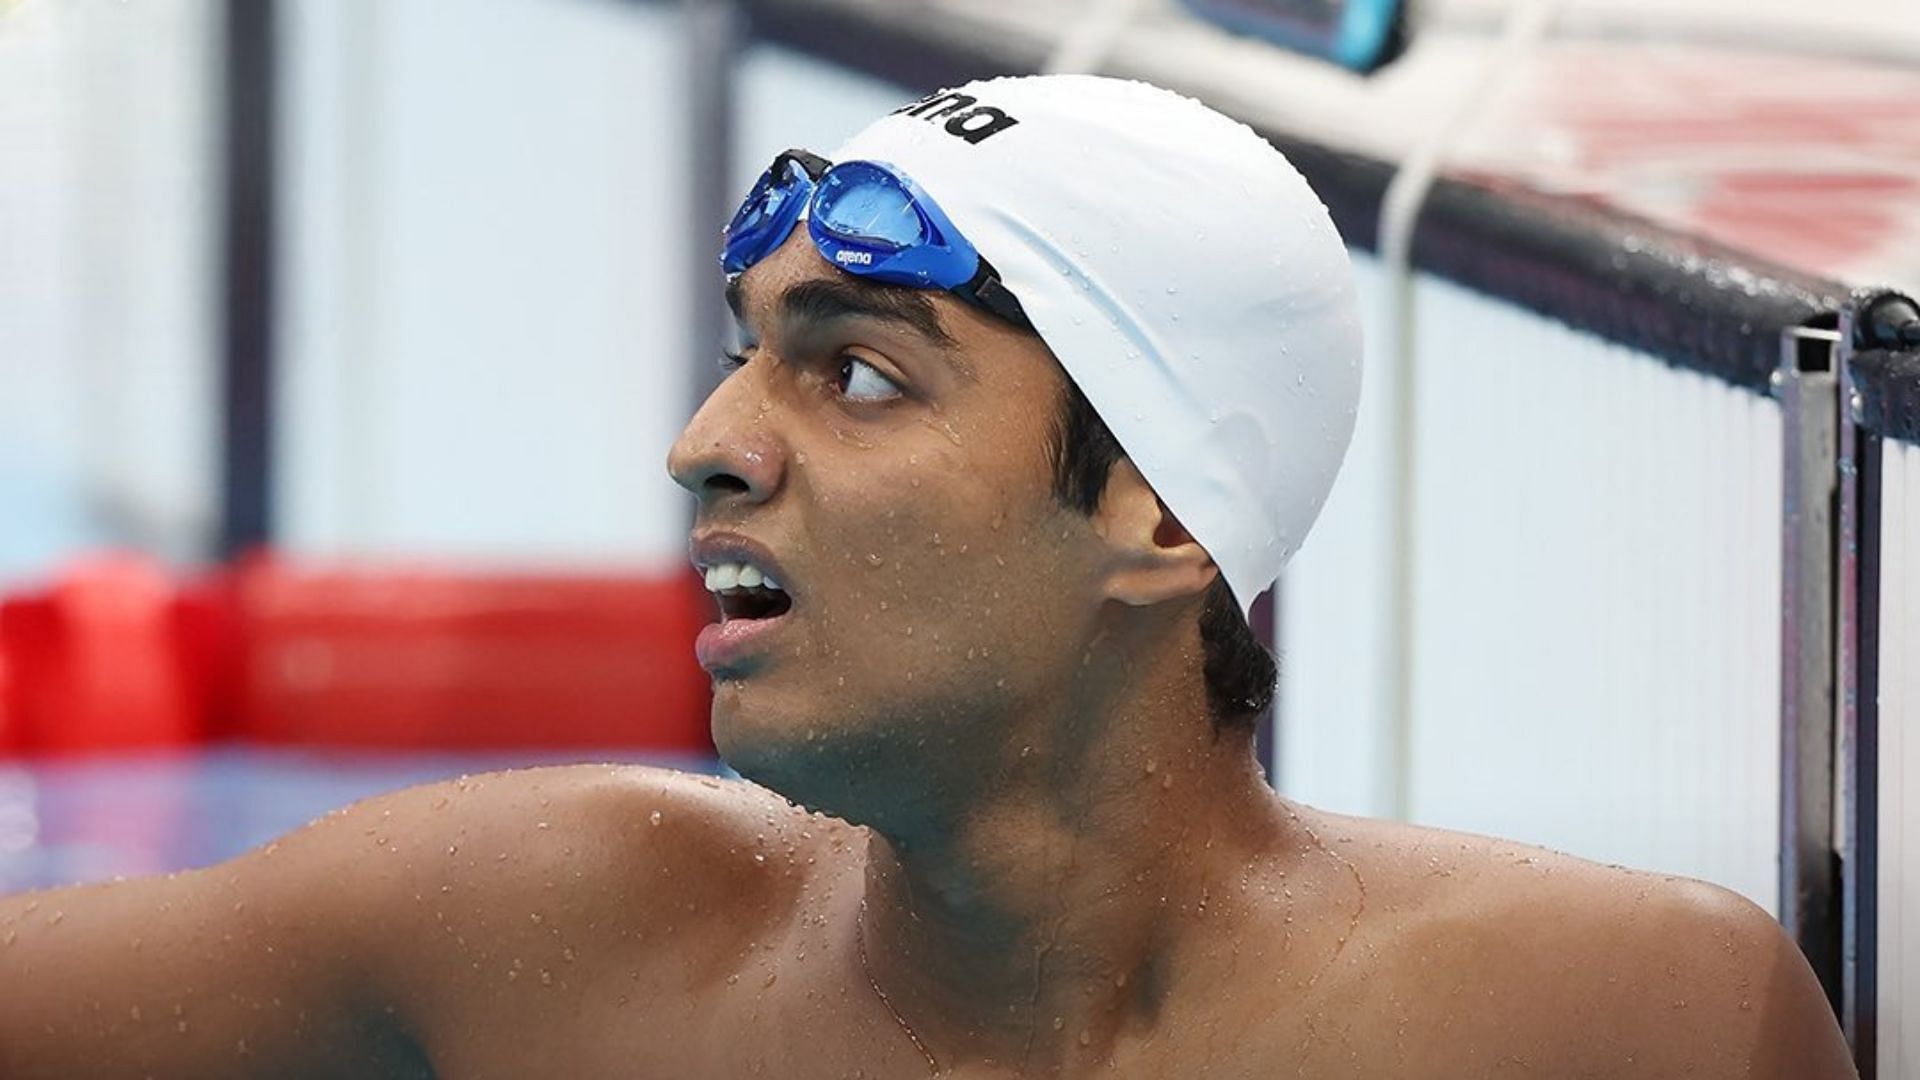 <div class="paragraphs"><p>File photo of Indian swimmer&nbsp;Srihari Nataraj who qualified for the semifinals of the men's 50m backstroke at the 2022 Commonwealth Games on Sunday.&nbsp;</p></div>